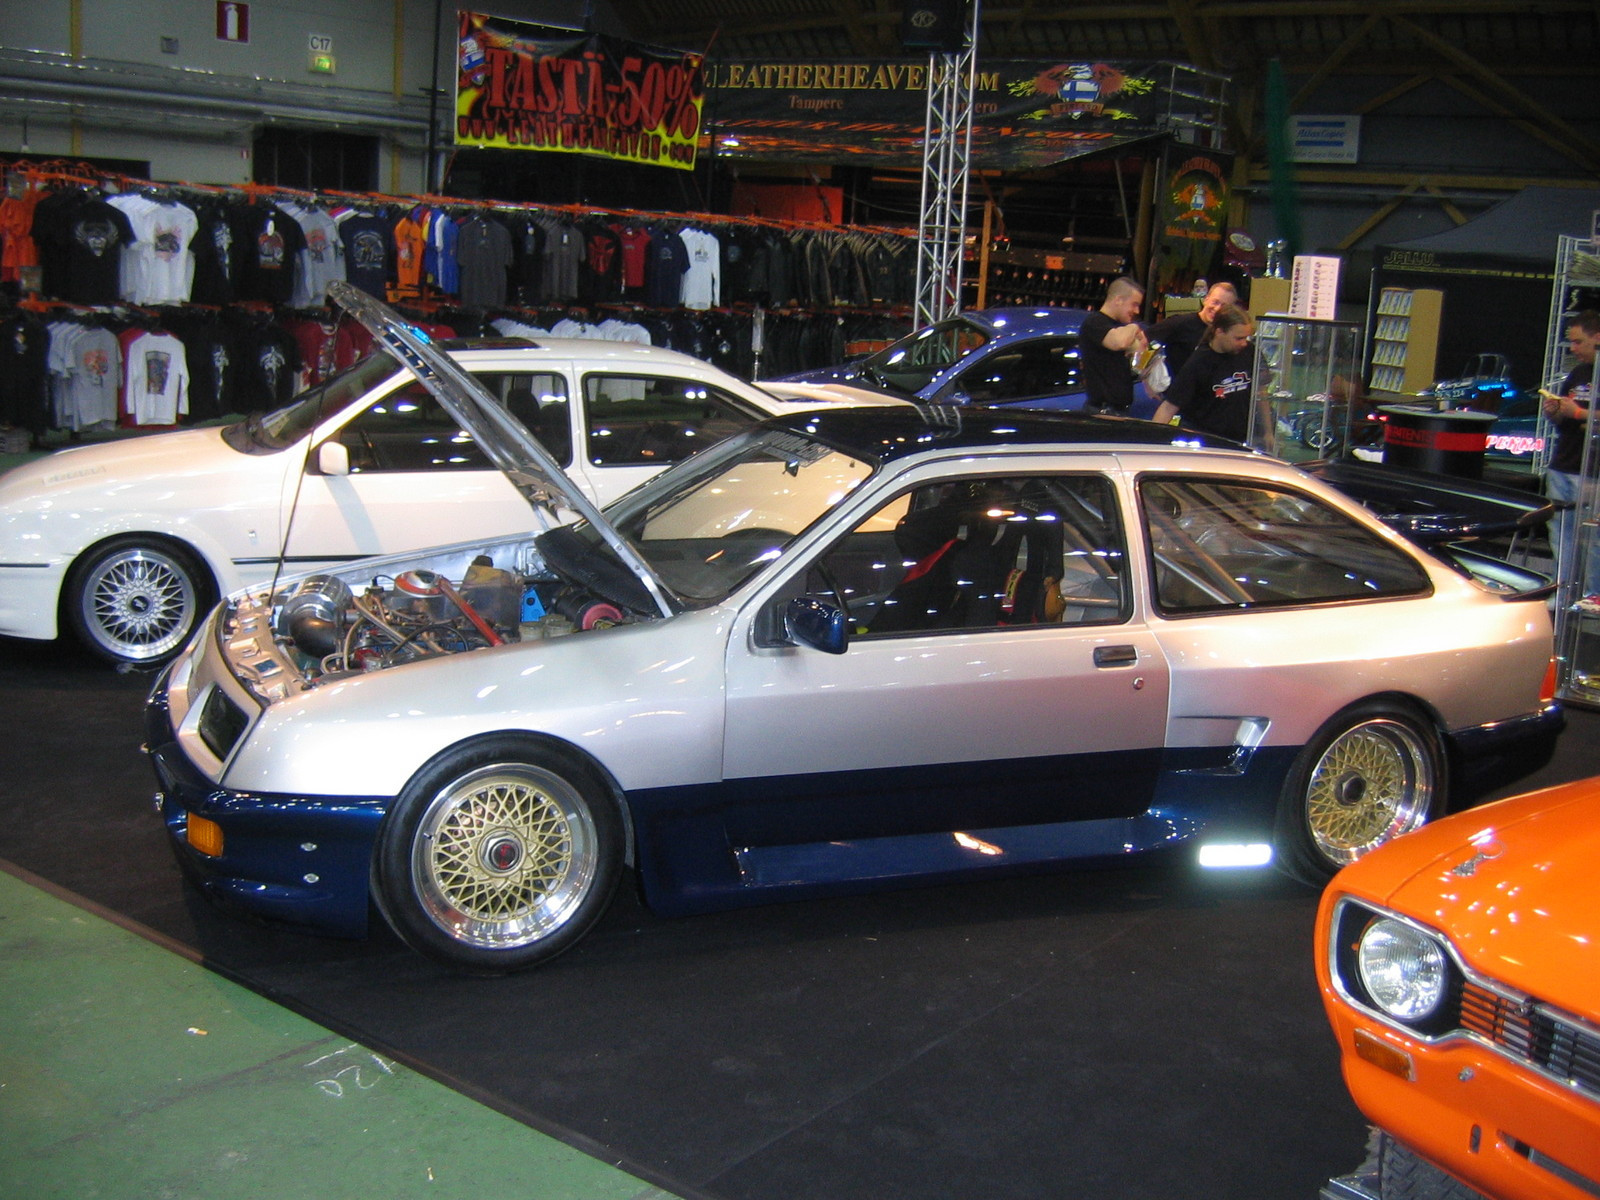 Hot Rod & Rock Show 2008 Tampere, Ford Sierra